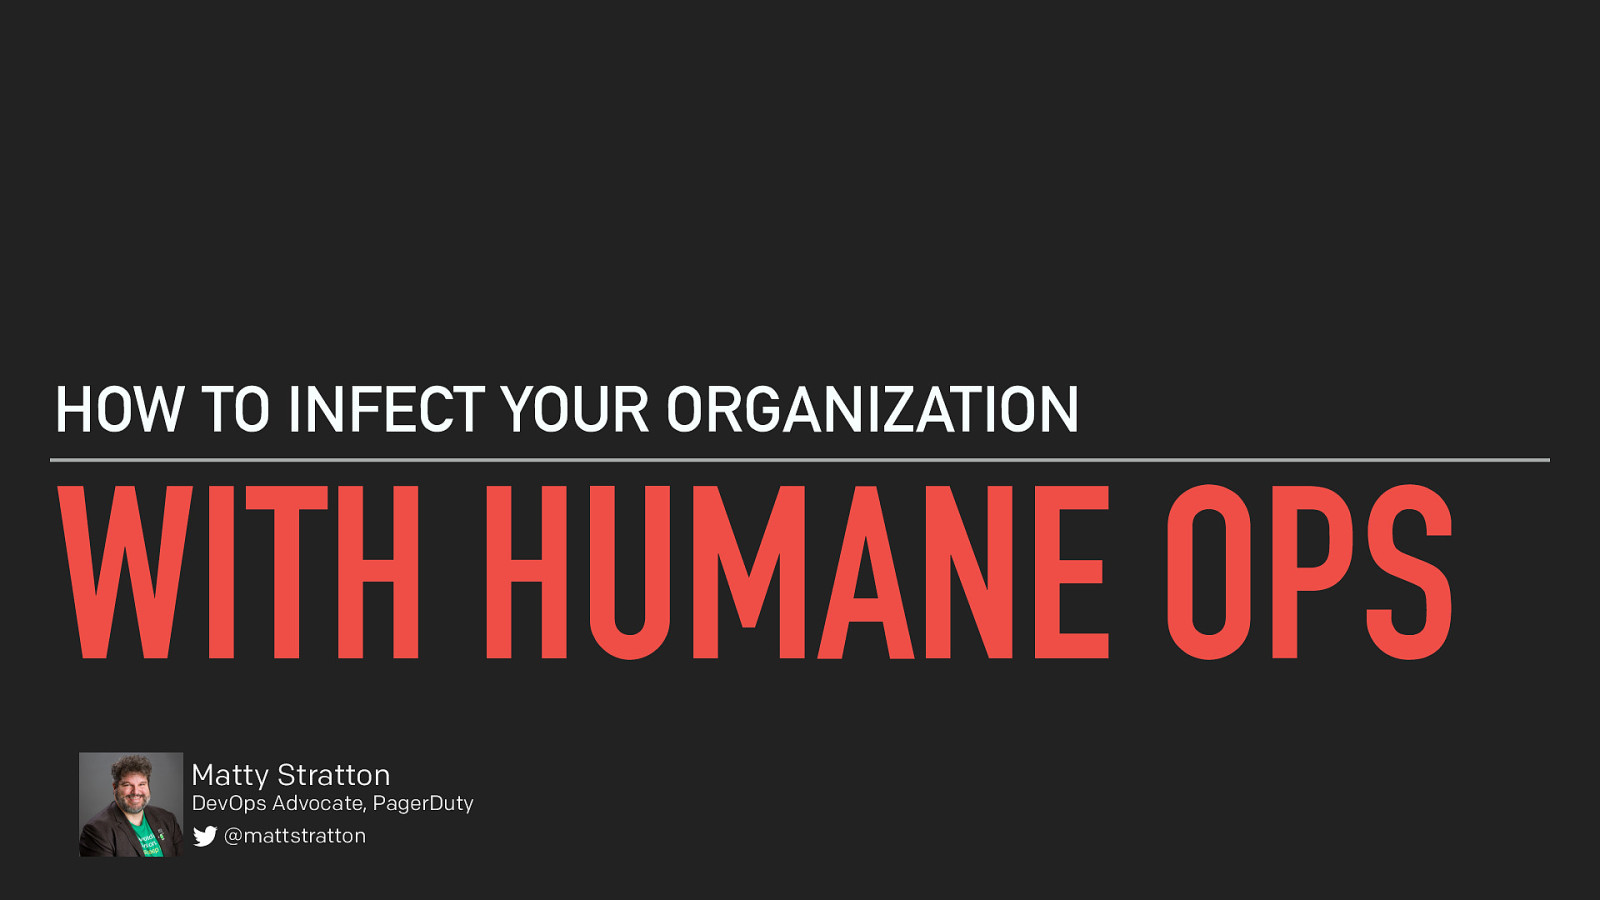 How Do You Infect Your Organization With Humane Ops?